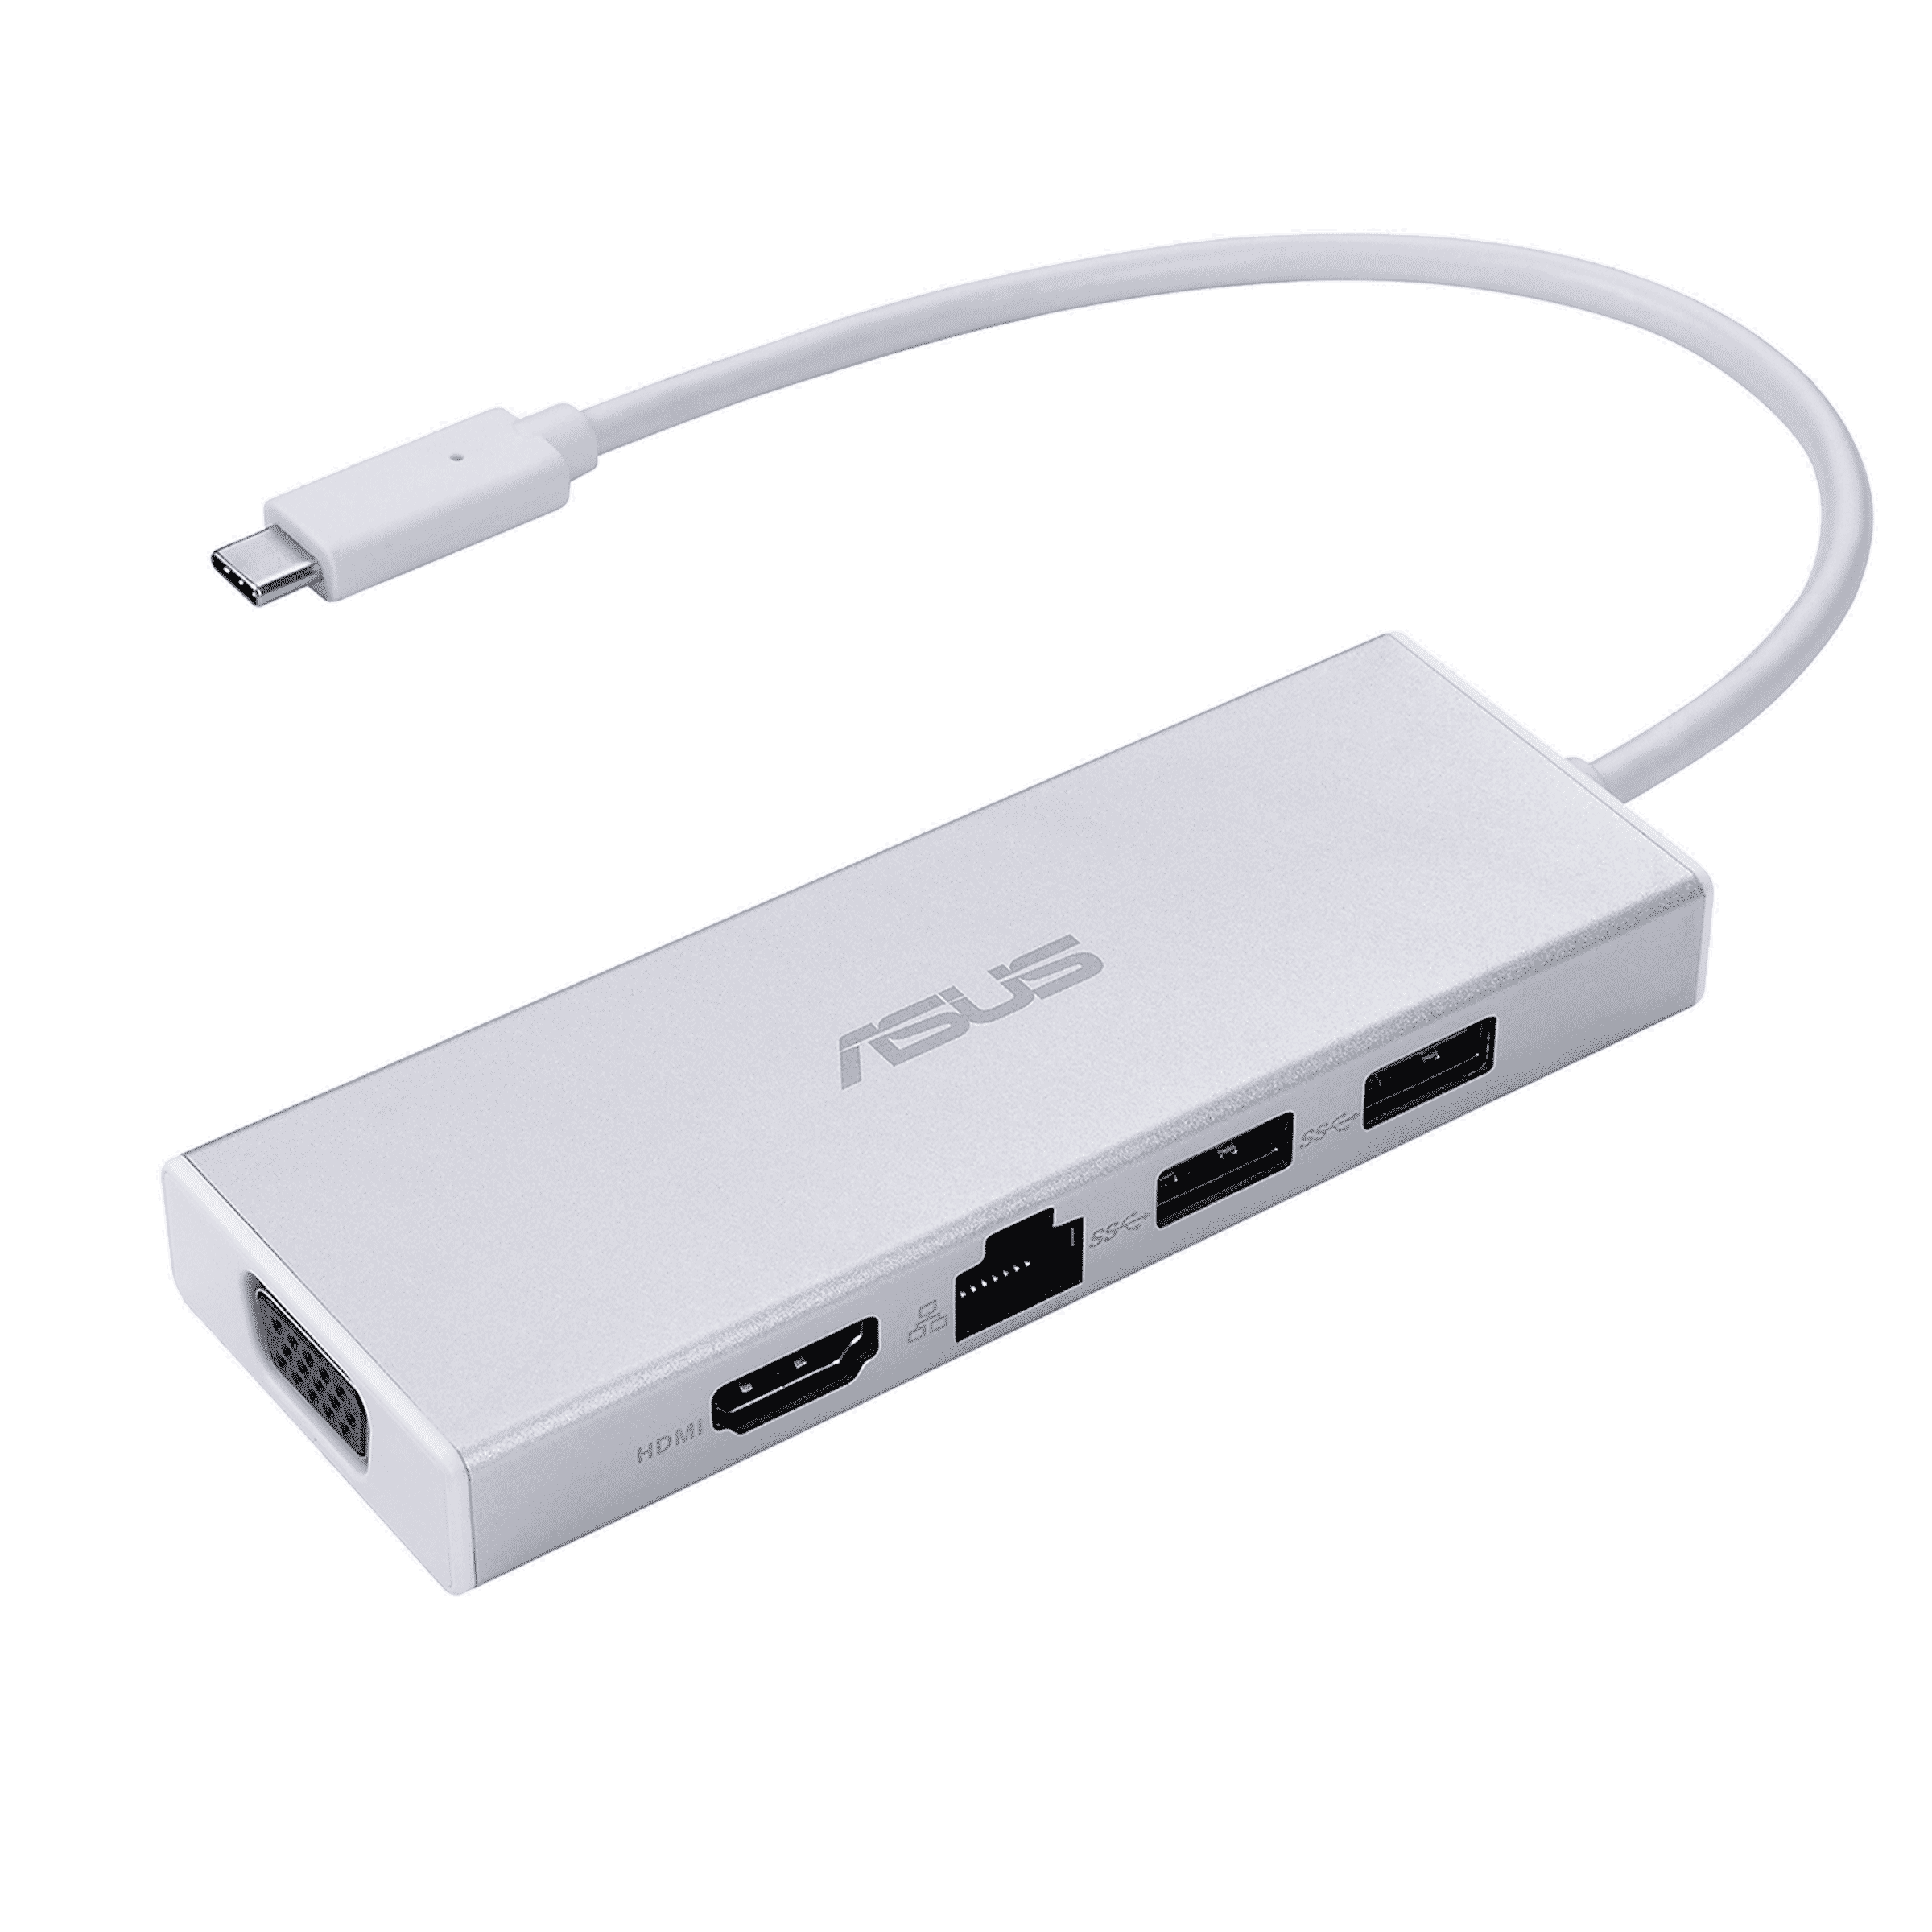 ASUS OS200 DONGLE｜Docks, Dongles and Cable｜ASUS USA